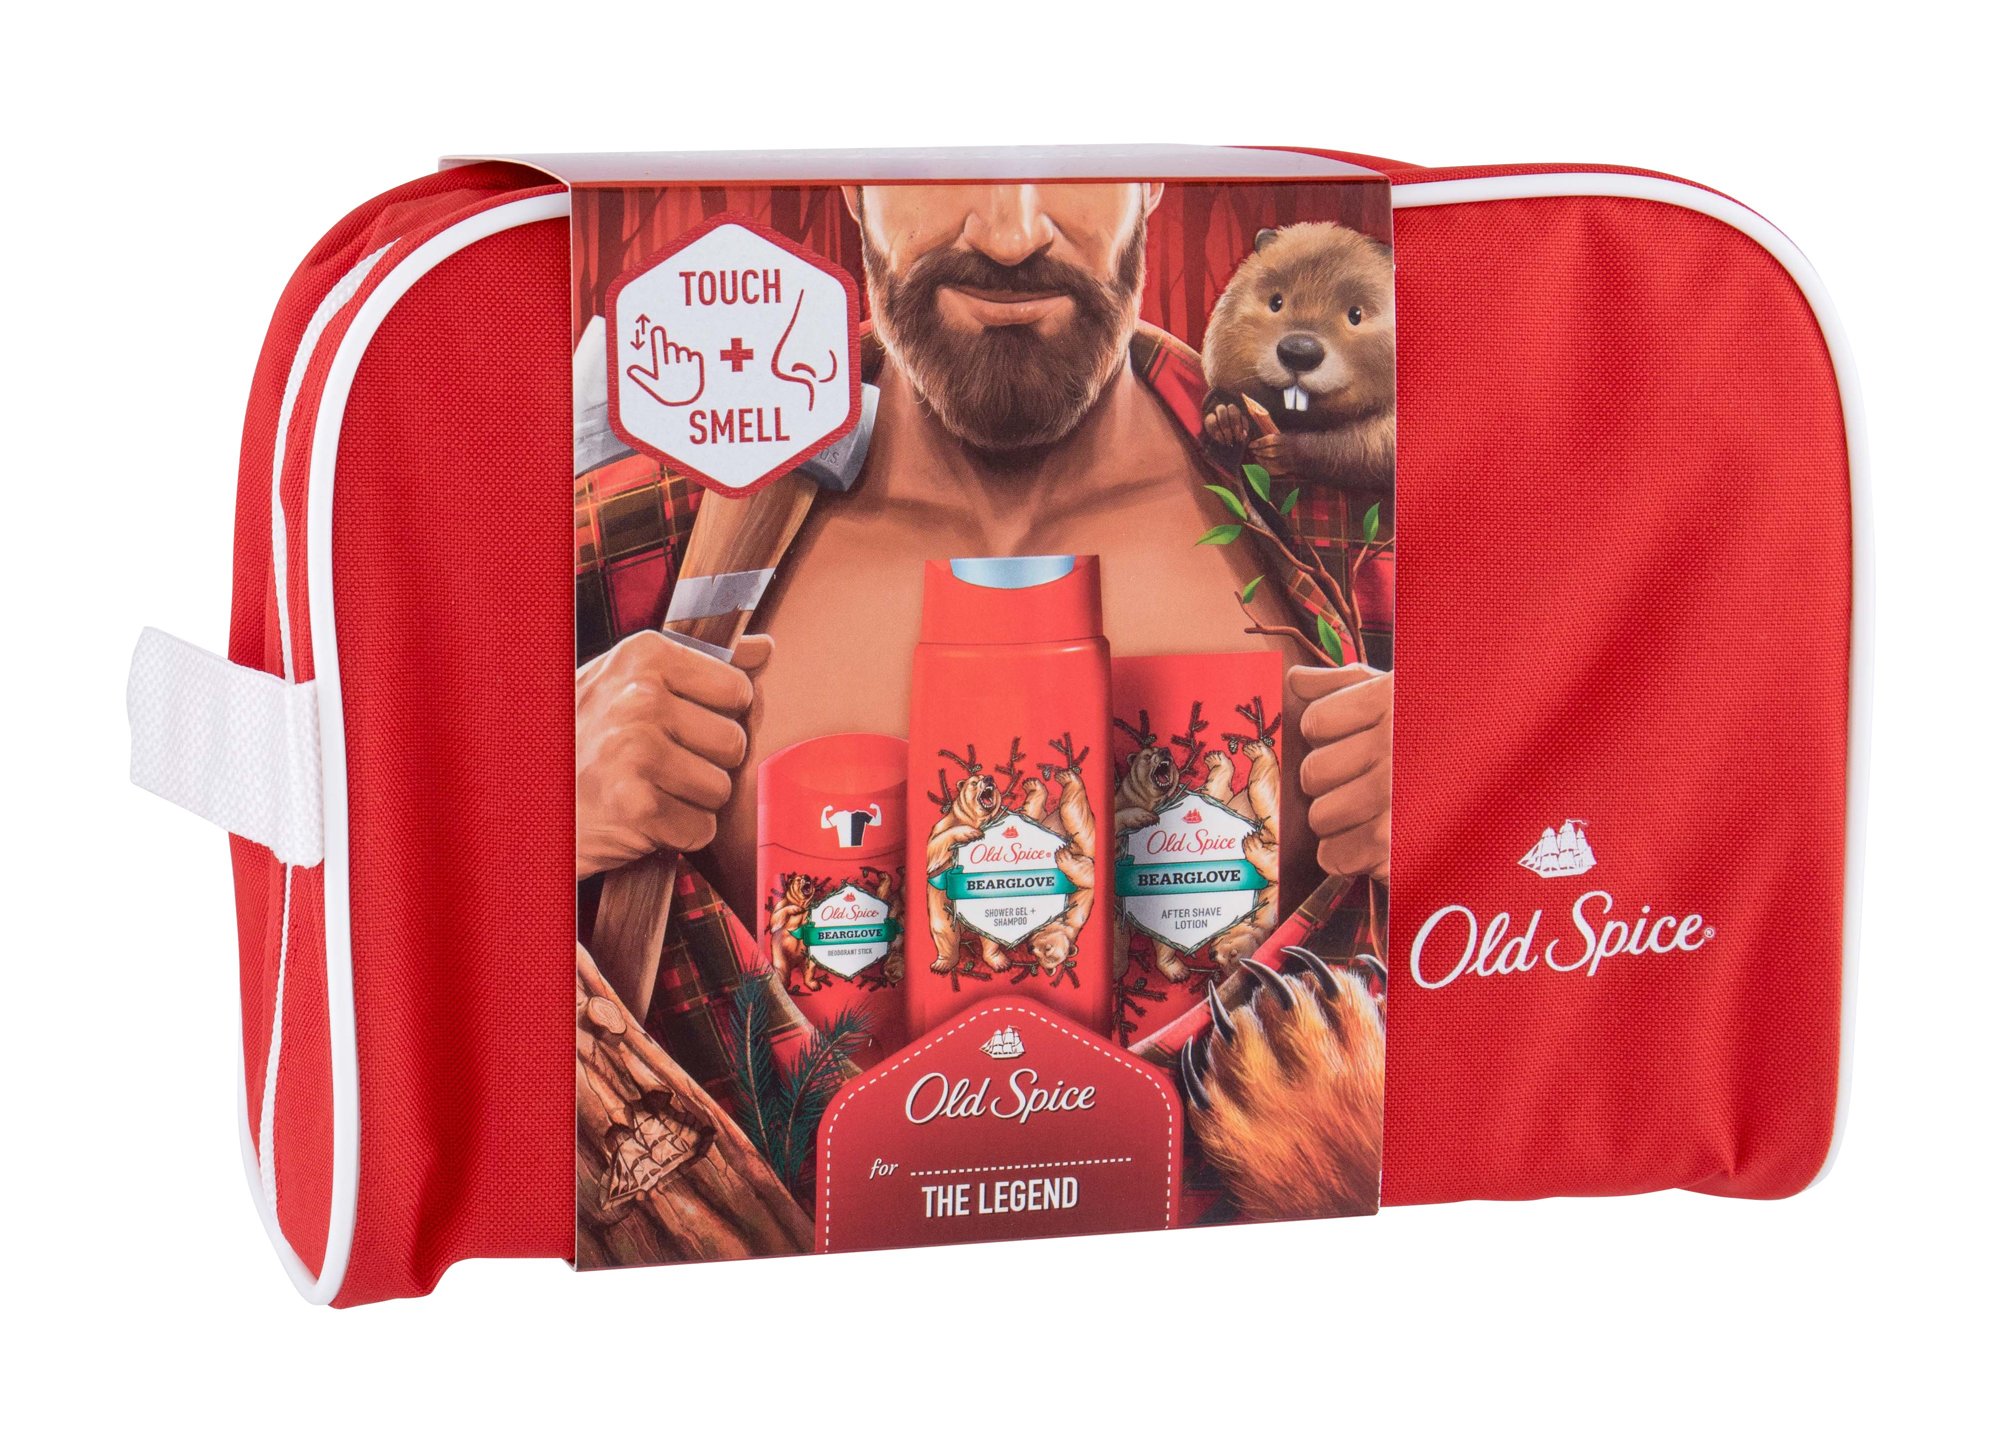 Old Spice Bearglove 100ml Aftershave Water 100 ml + Shower Gel 250 ml + Deostick 50 ml + Cosmetic Bag vanduo po skutimosi Rinkinys